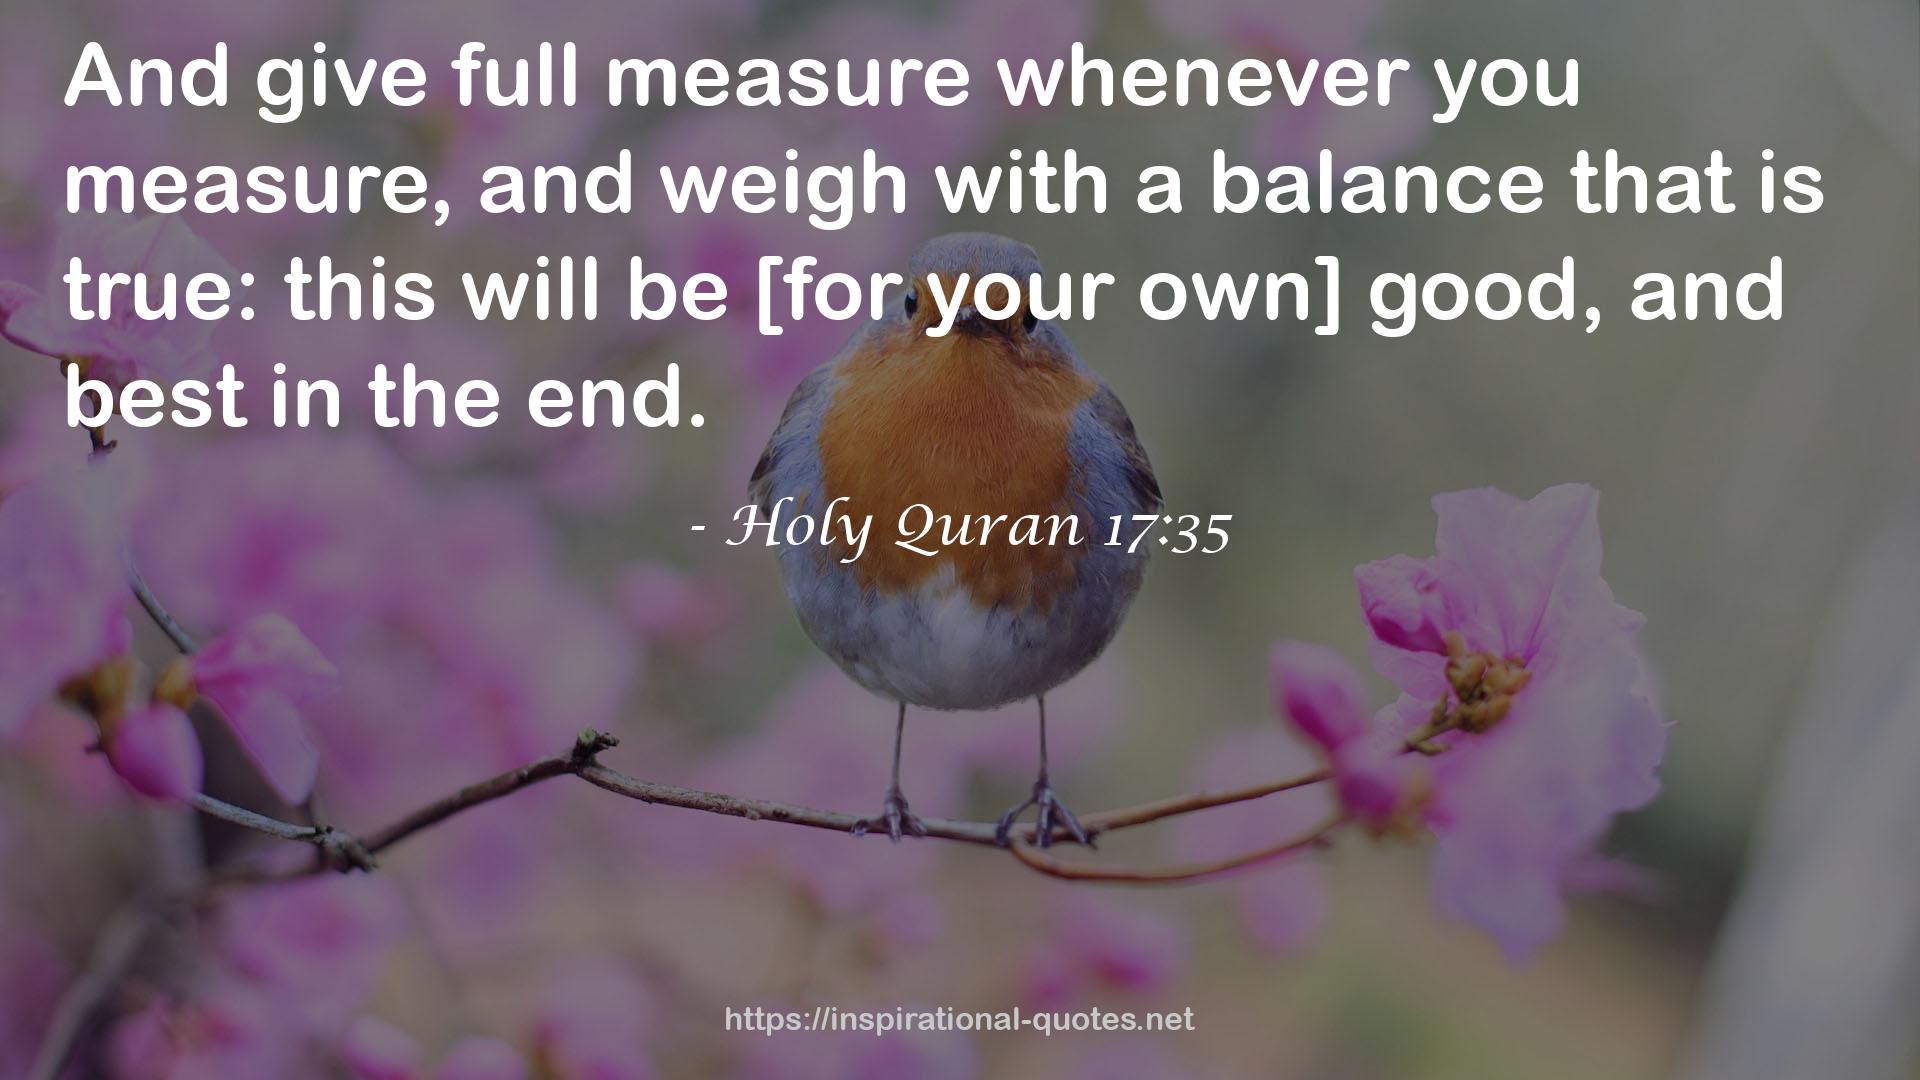 Holy Quran 17:35 QUOTES